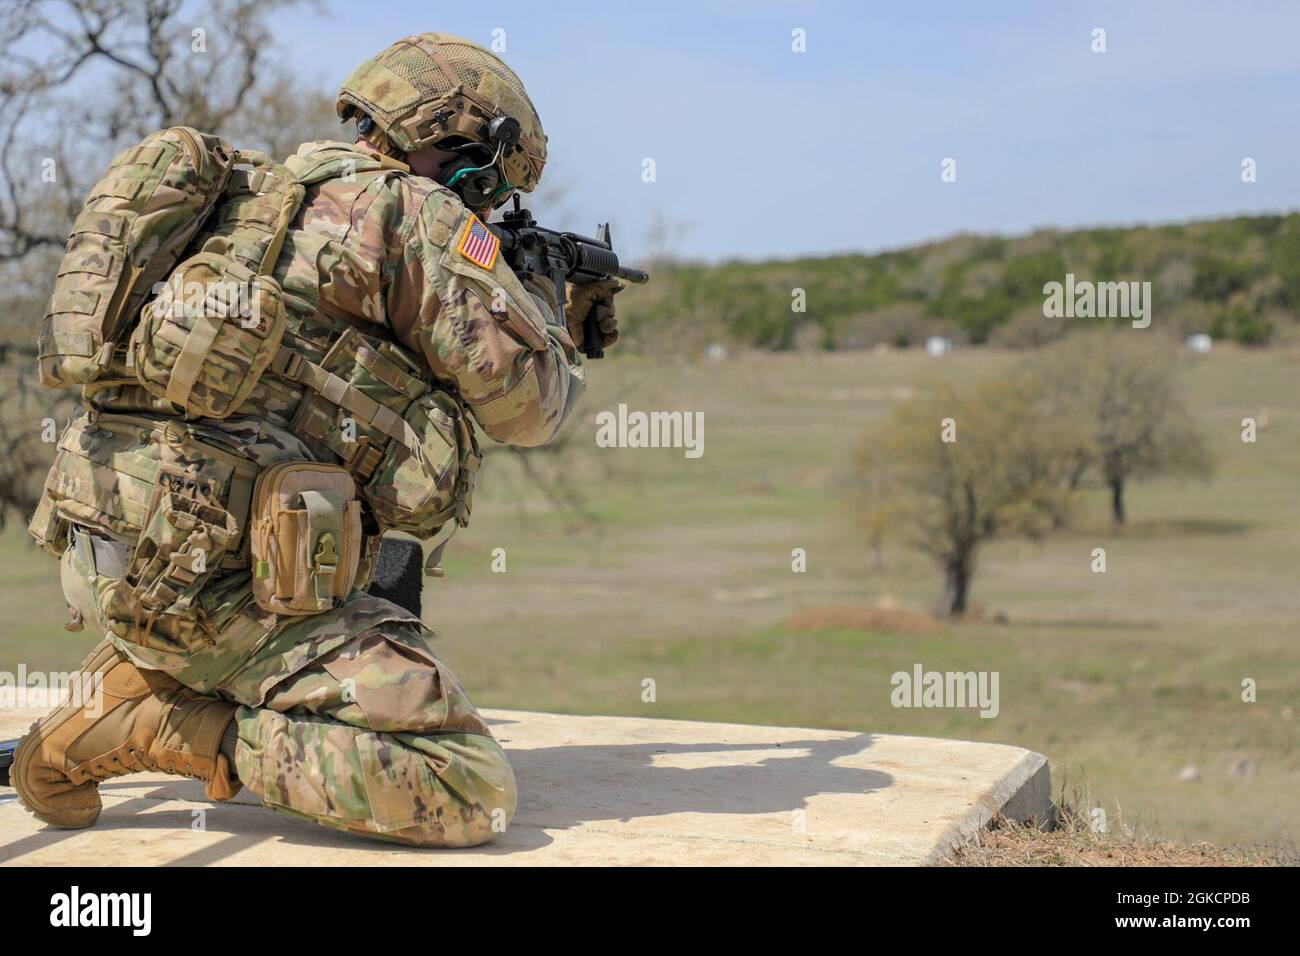 U.S. Army Capt. Thomas Loper, Army South network engineer officer, fires the M4 carbine on Joint Base San Antonio - Camp Bullis, Texas, March 15, 2021. Army South conducted qualification on various weapons systems the month of March. Stock Photo